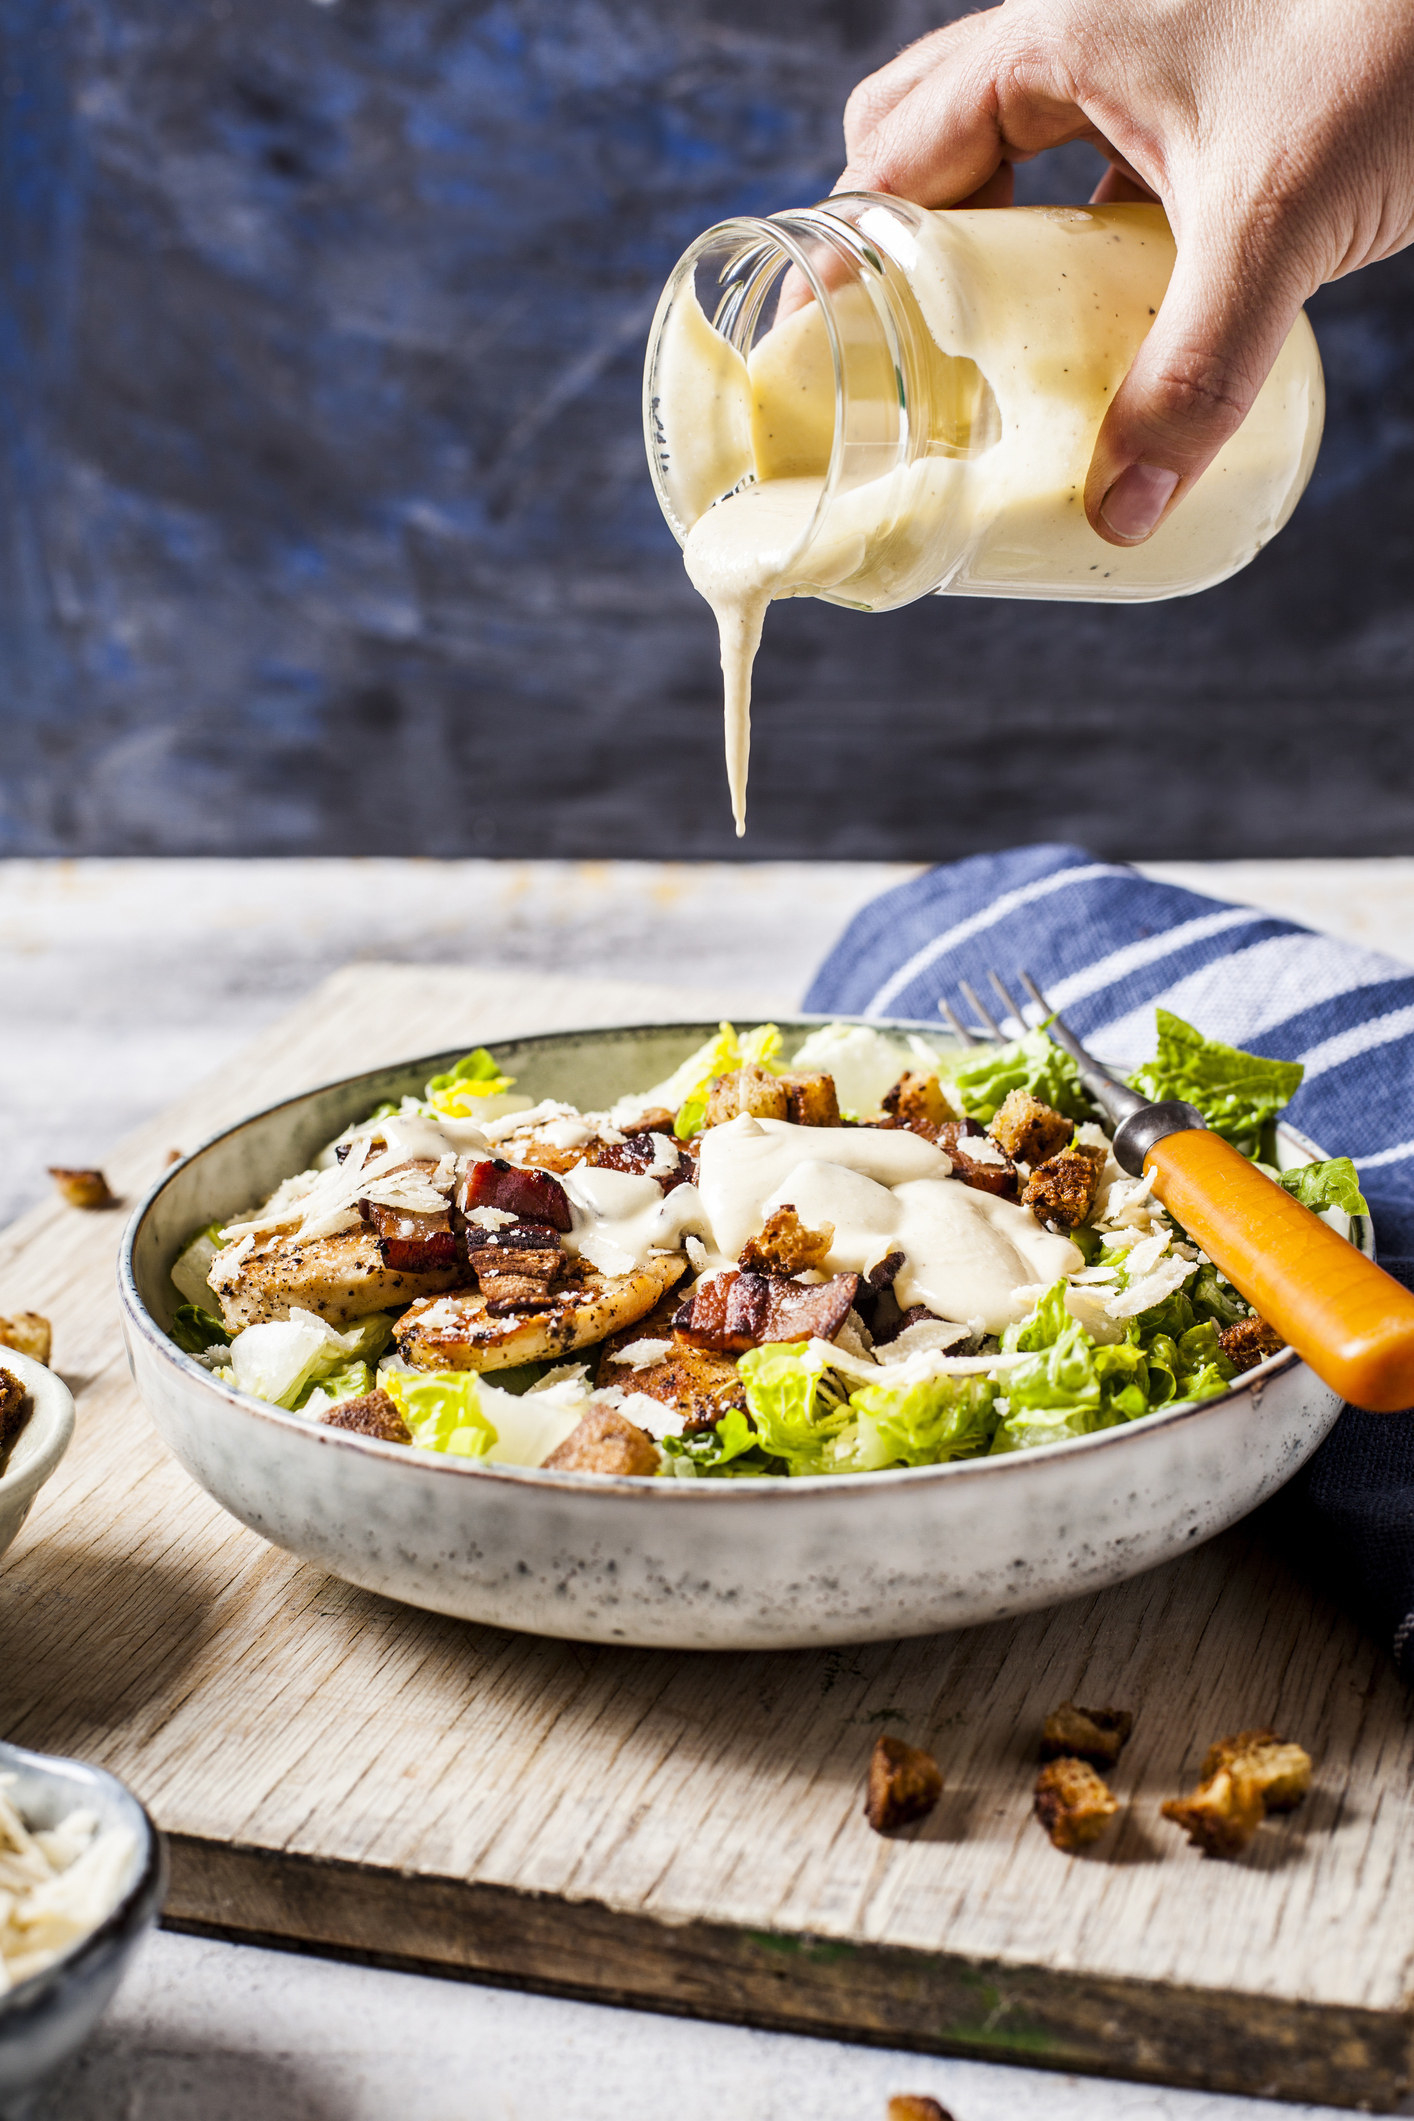 A hand pouring a thick Caesar dressing out of a glass jar onto a fresh salad in a bowl on a wooden board